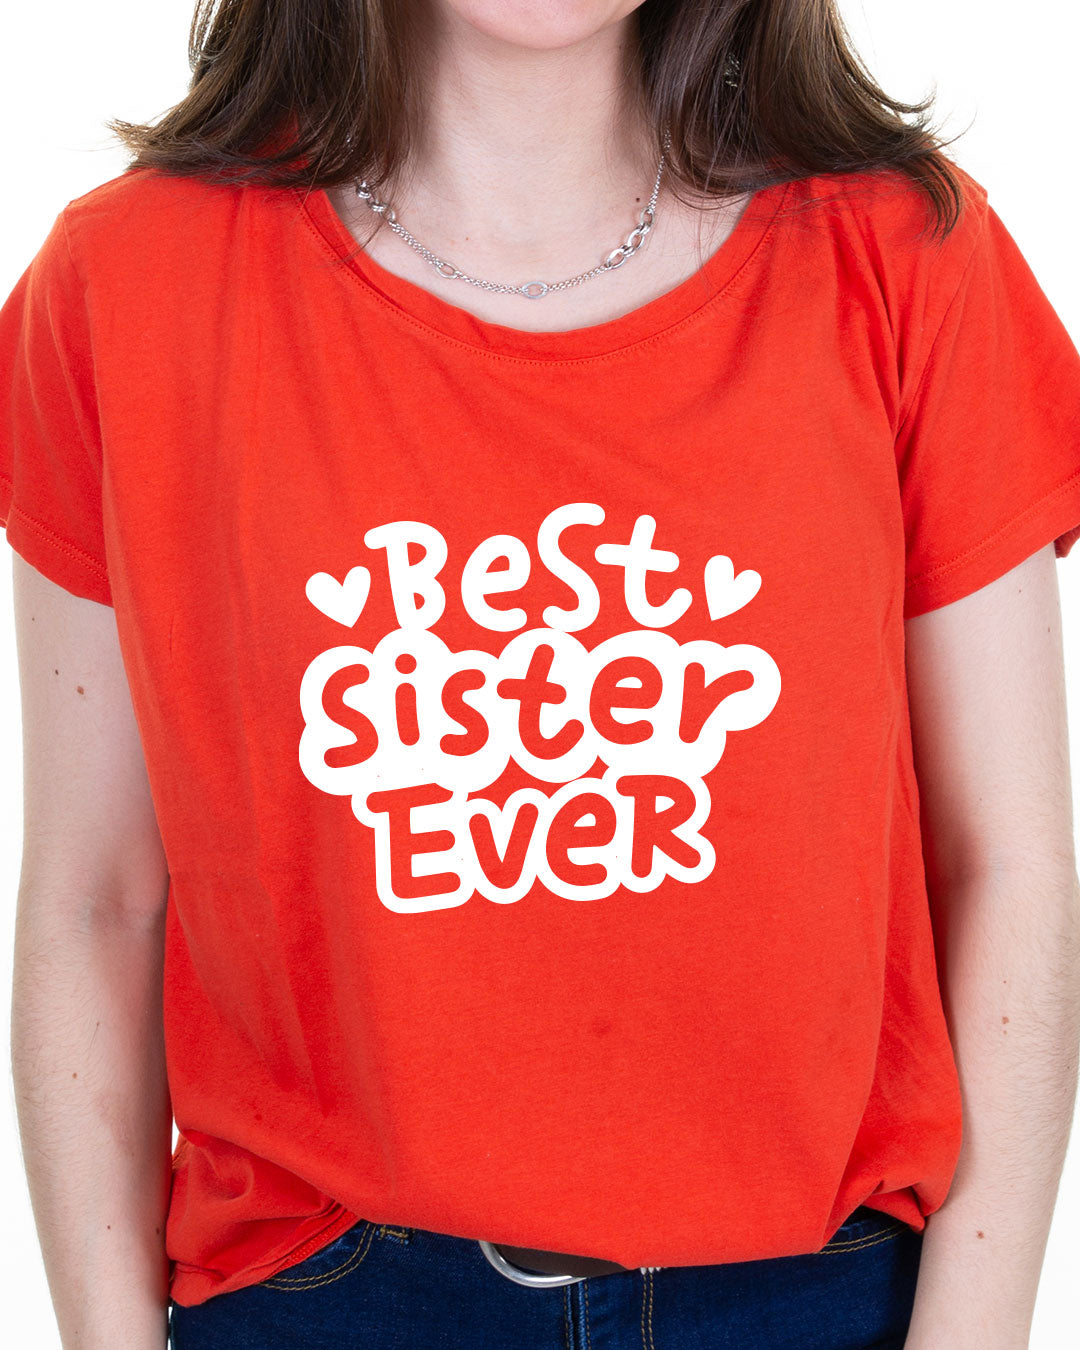 Best Sister Ever - Red T-shirt